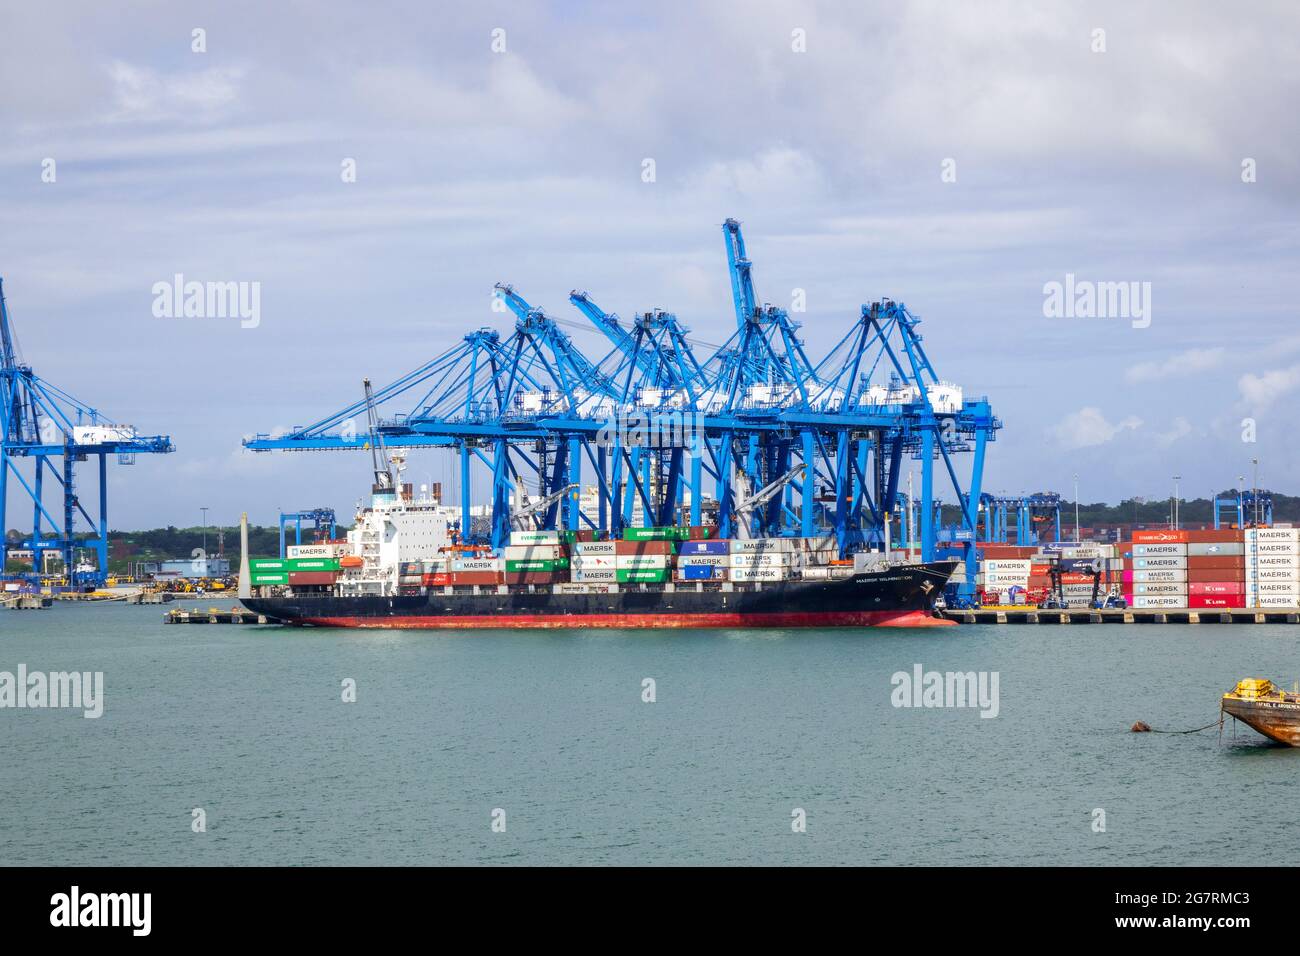 Maersk Wilmington Container Cargo Ship In Port Colon Republic Of Panama Against A Background Of Cranes Stock Photo